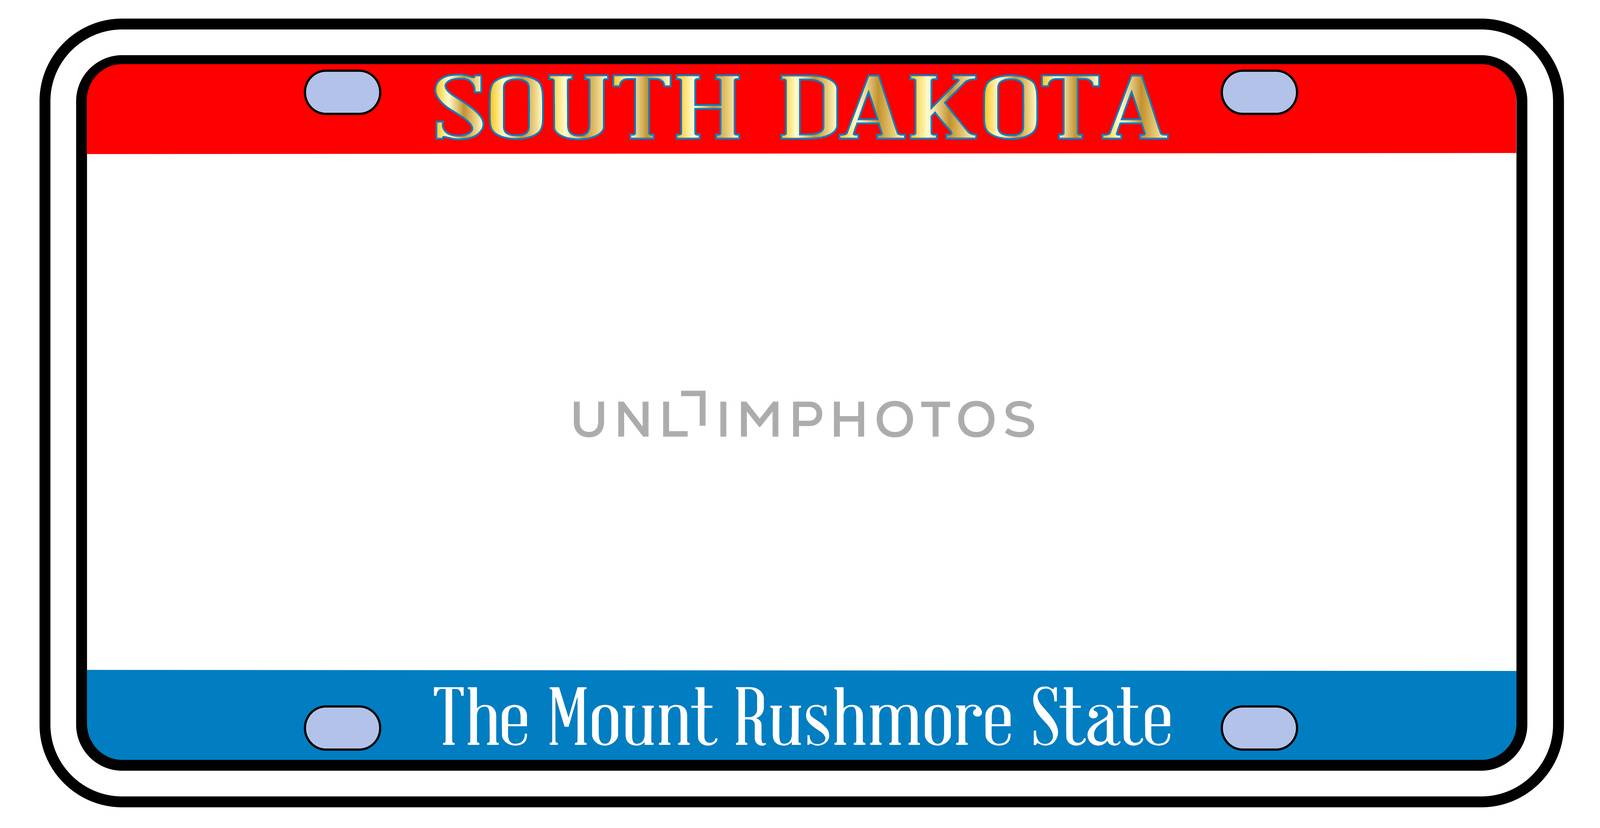 Blank South Dakota license plate in the colors of the state flag over a white background